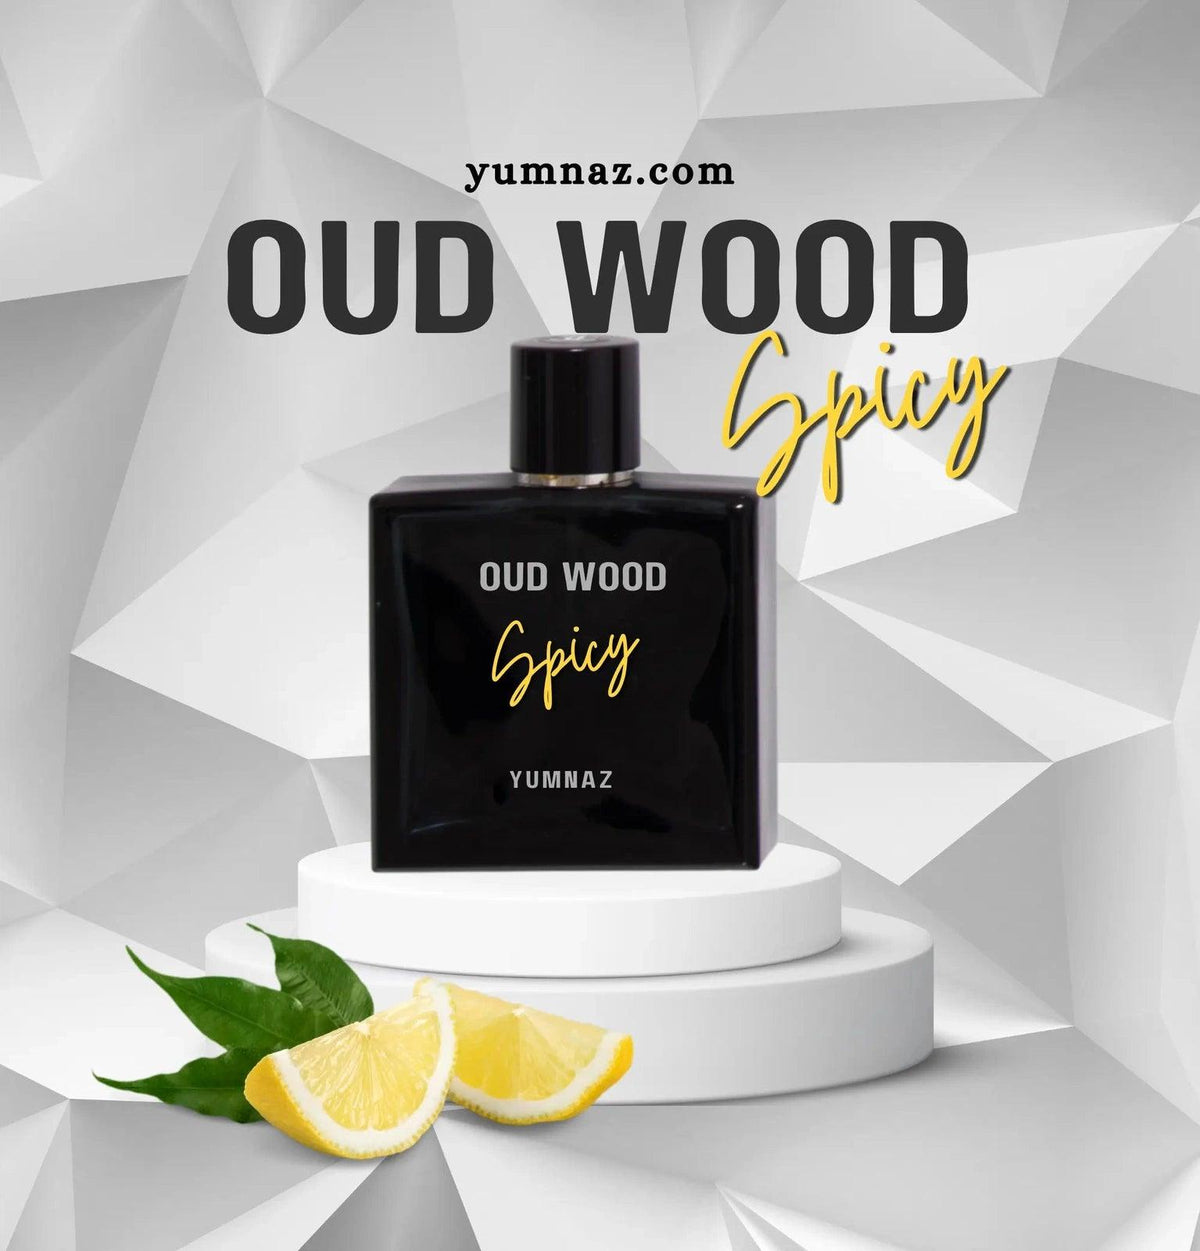 Oud Wood Spicy by Yumnaz - Perfume Price in Pakistan | Impression of Oud Wood